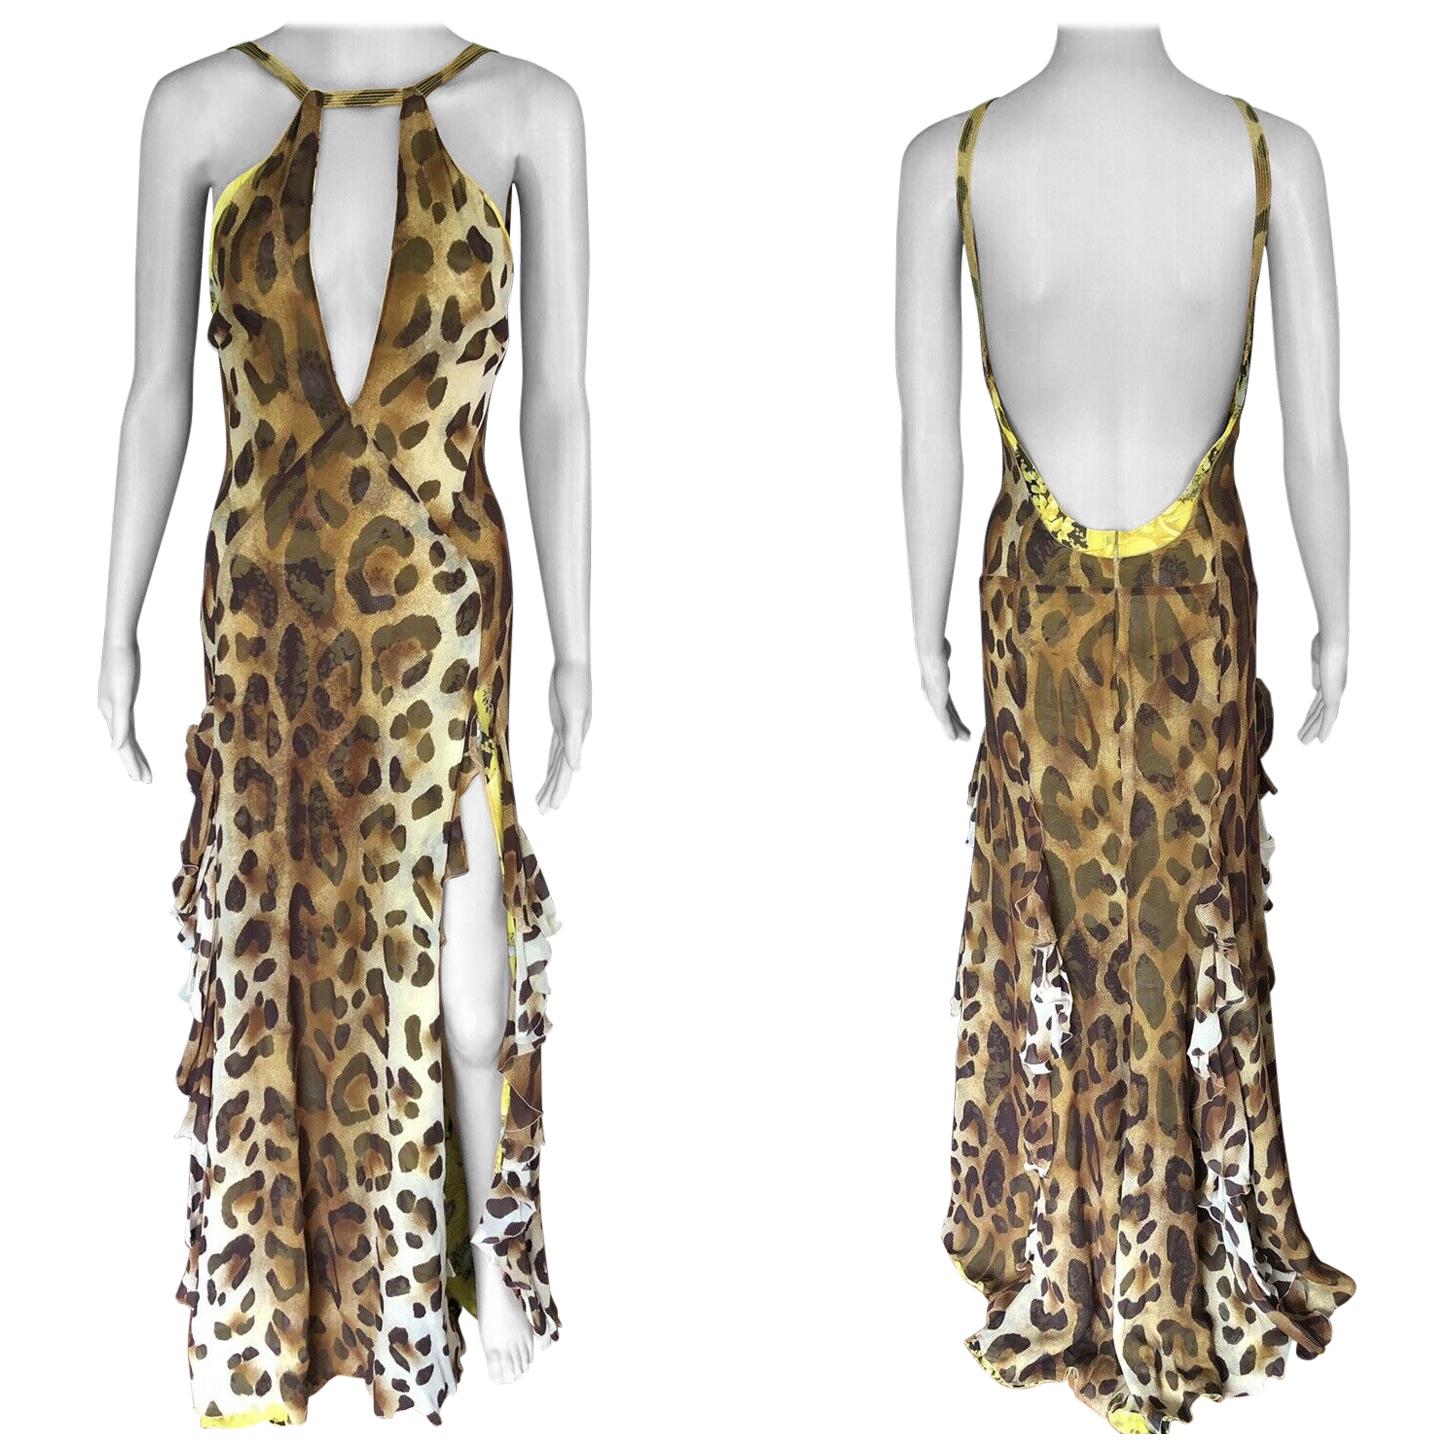 Gianni Versace S/S 2002 Vintage Plunged Backless Dress Gown For Sale